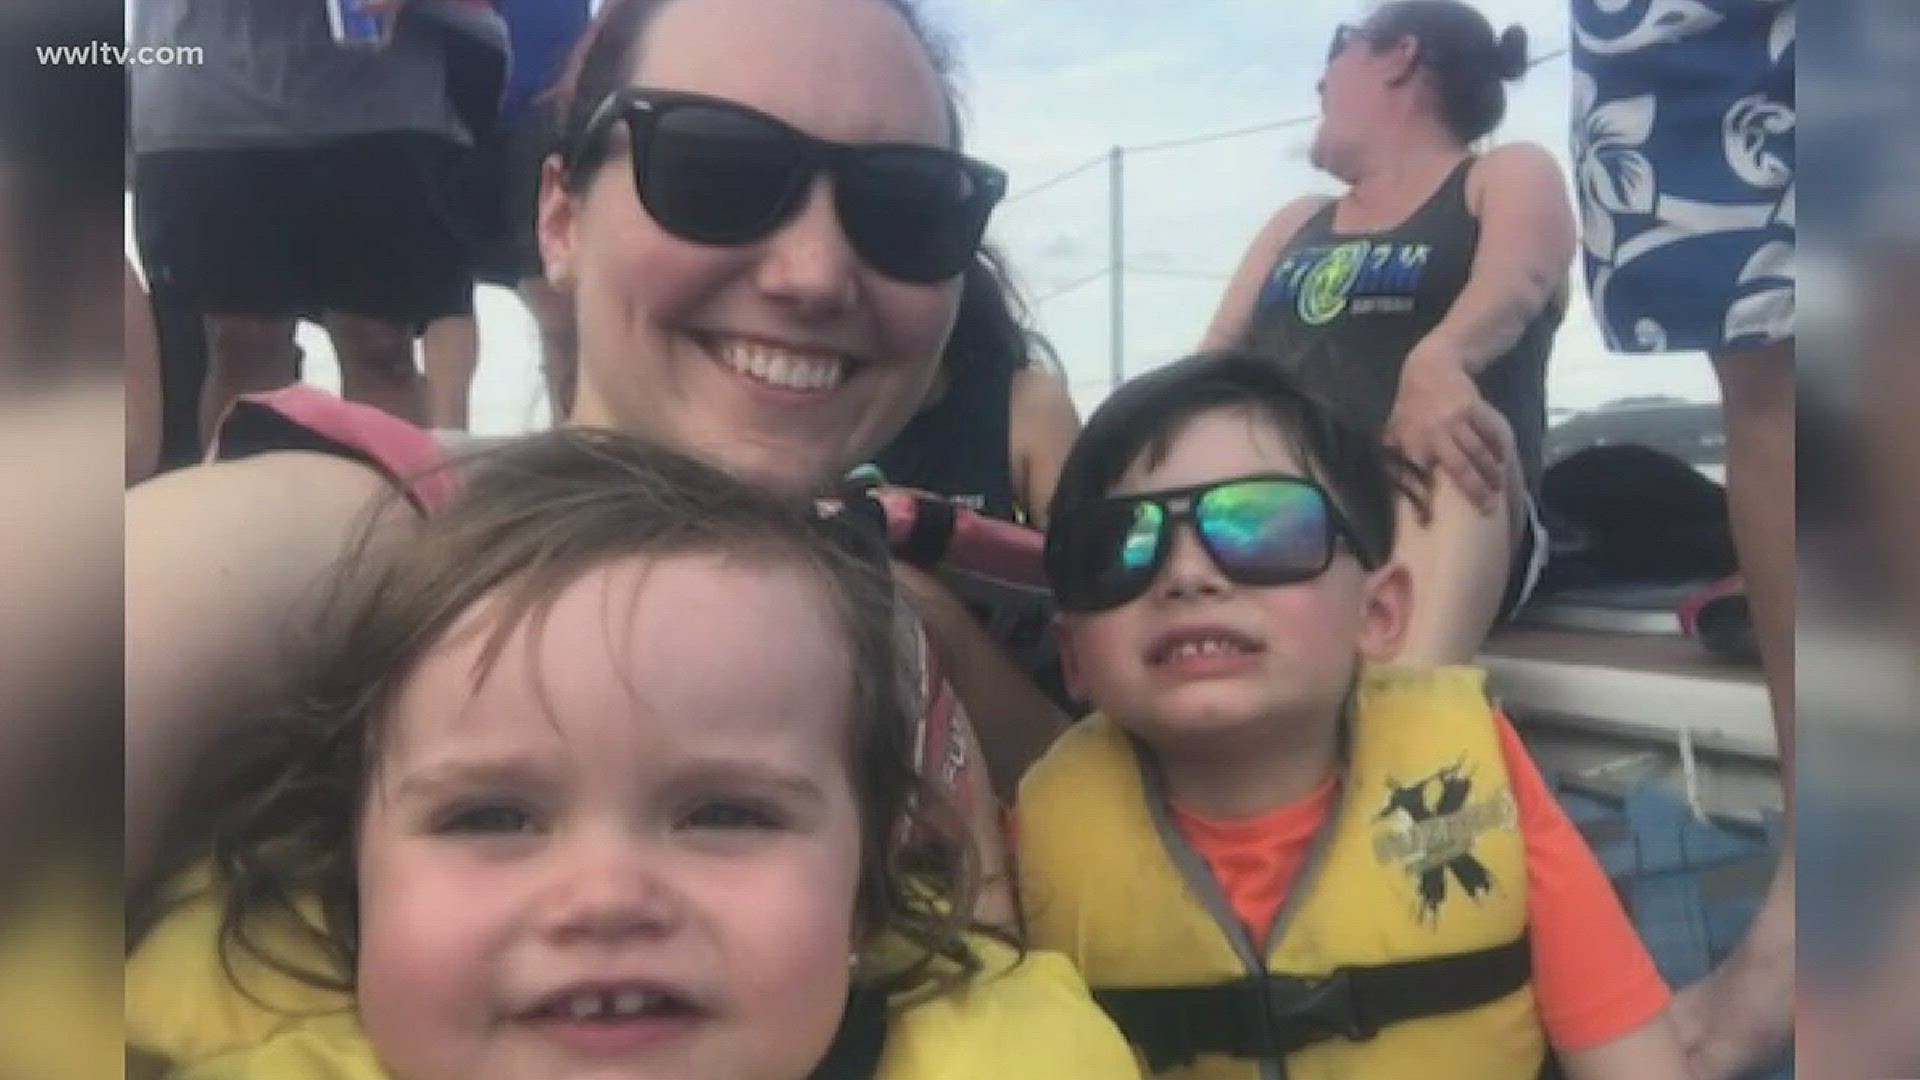 "It's a bittersweet thing because you feel very blessed to not have been on the boat and have our babies with us ... But you know these people came here to go on a family vacation to create memories and so many are leaving without a part of their family."